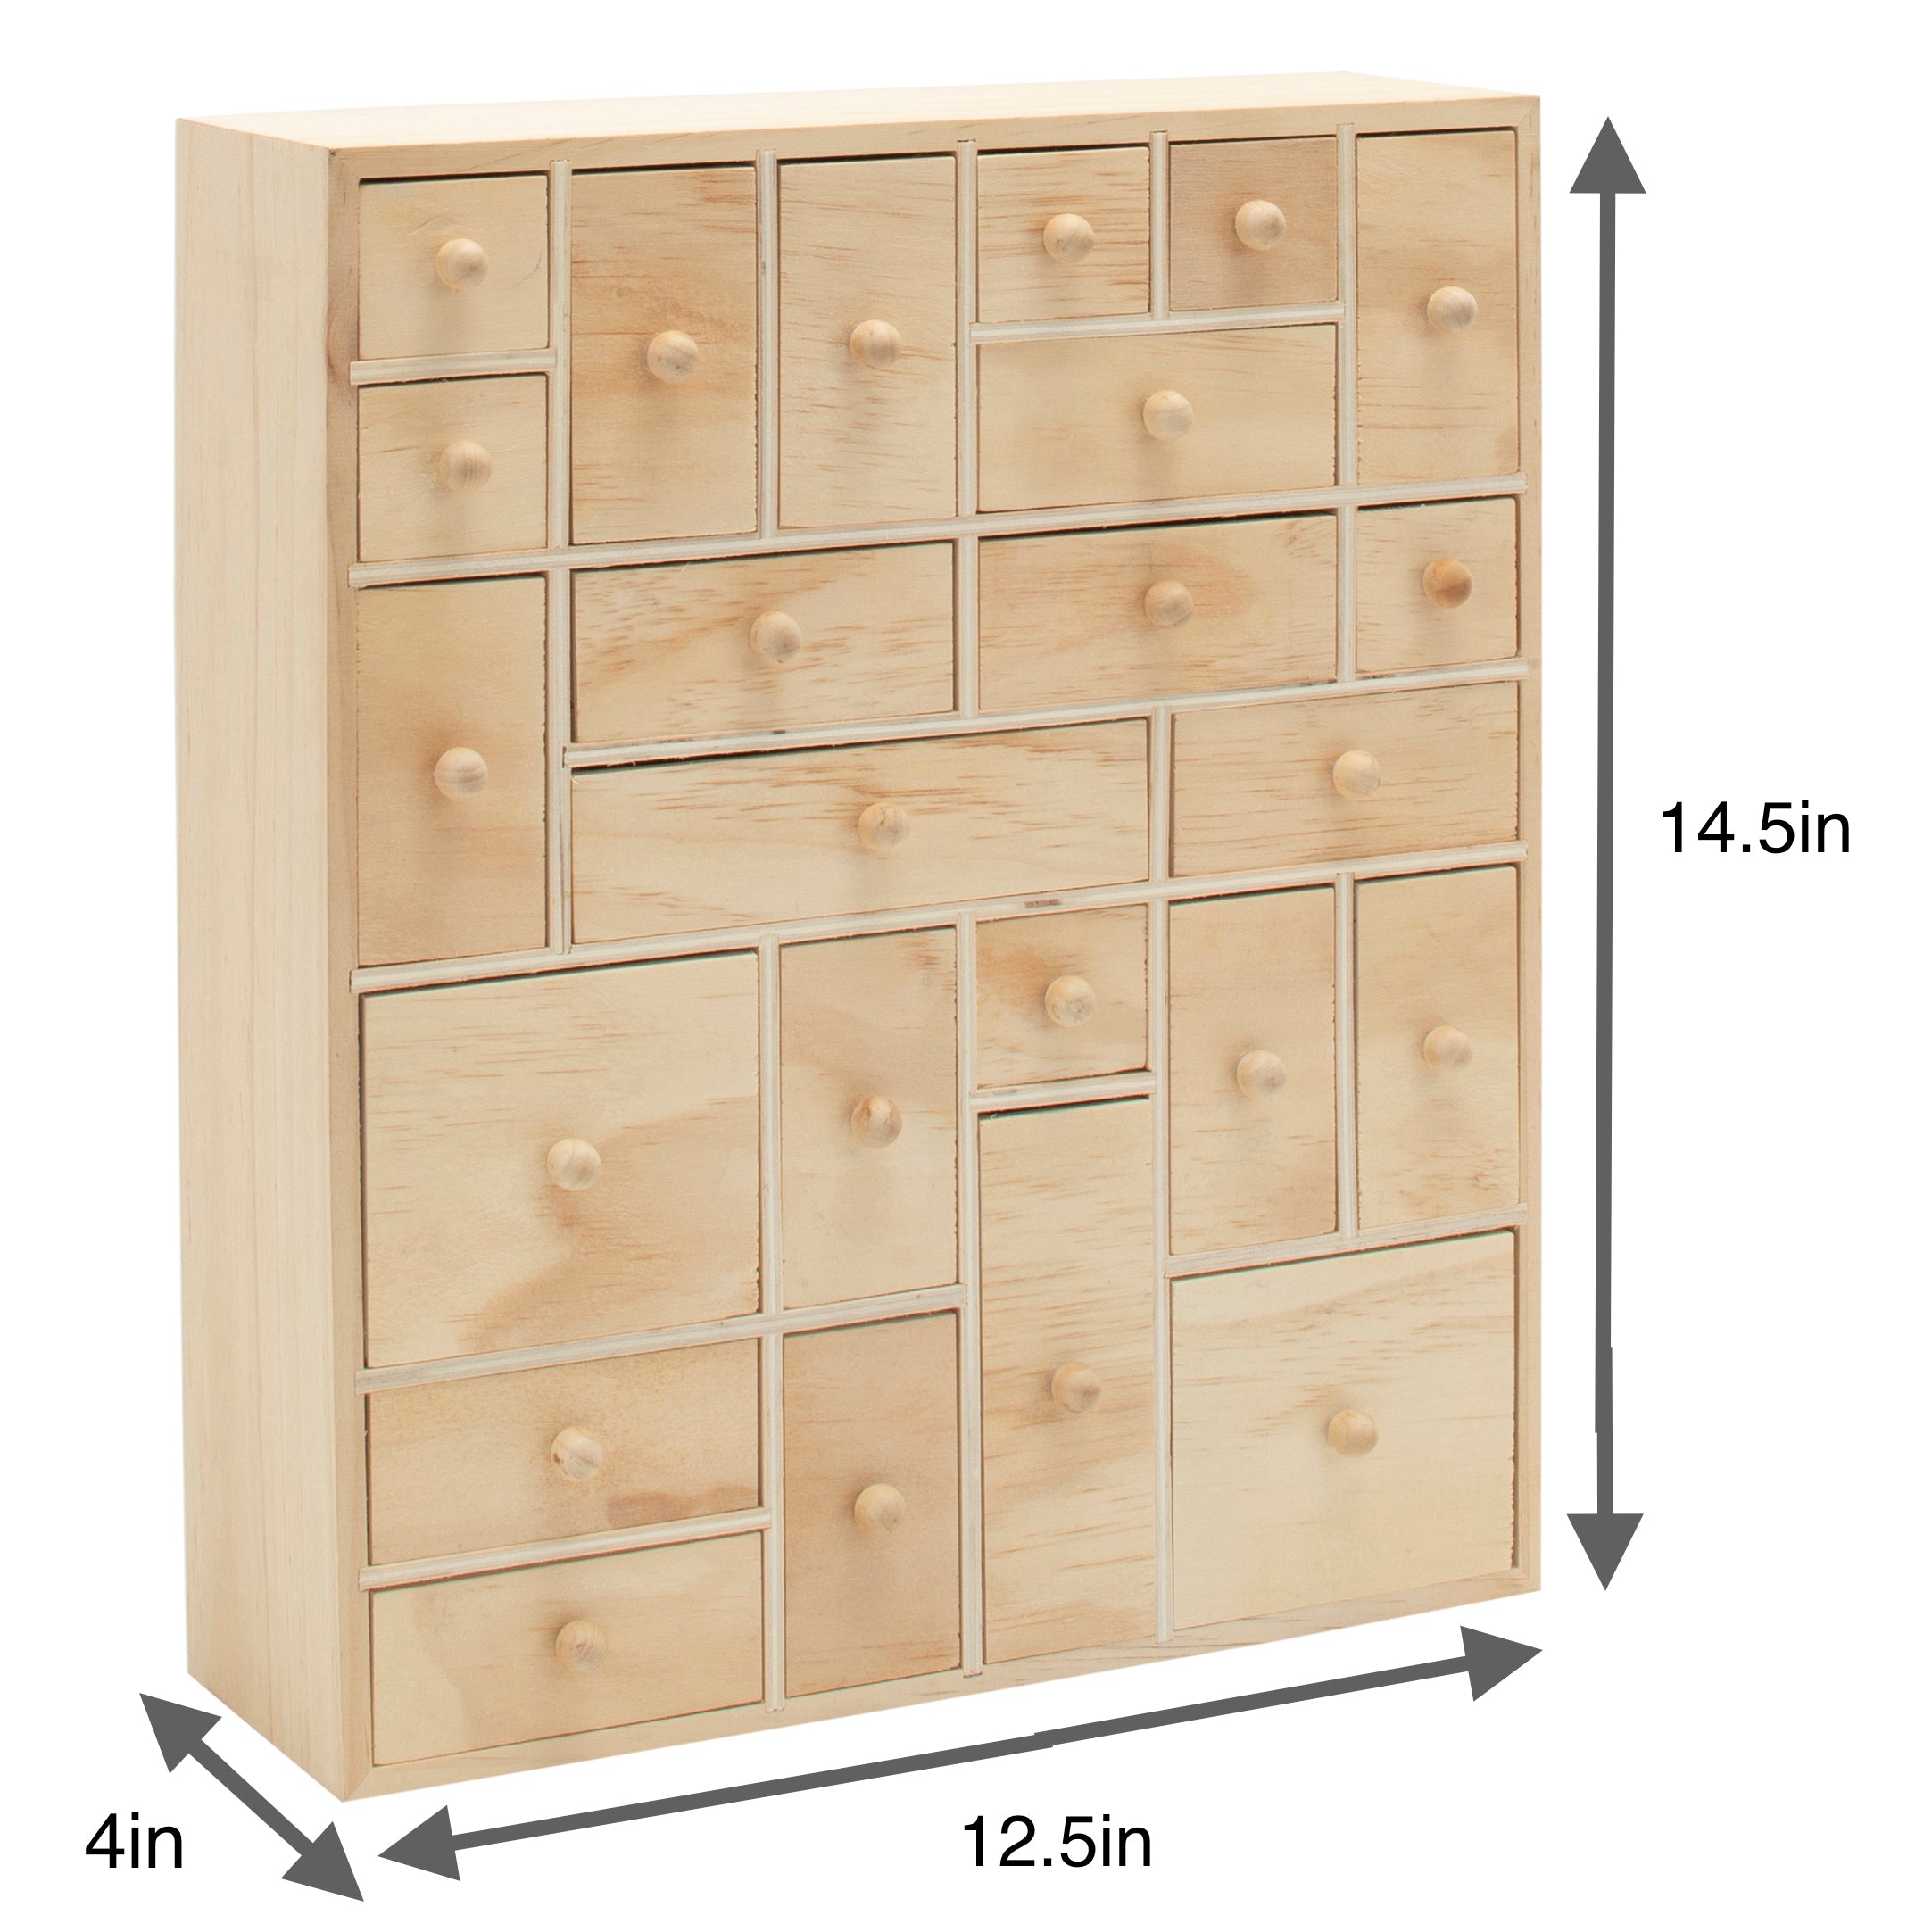 Wholesale Mini Wood Storage Drawers With Recreational Designs